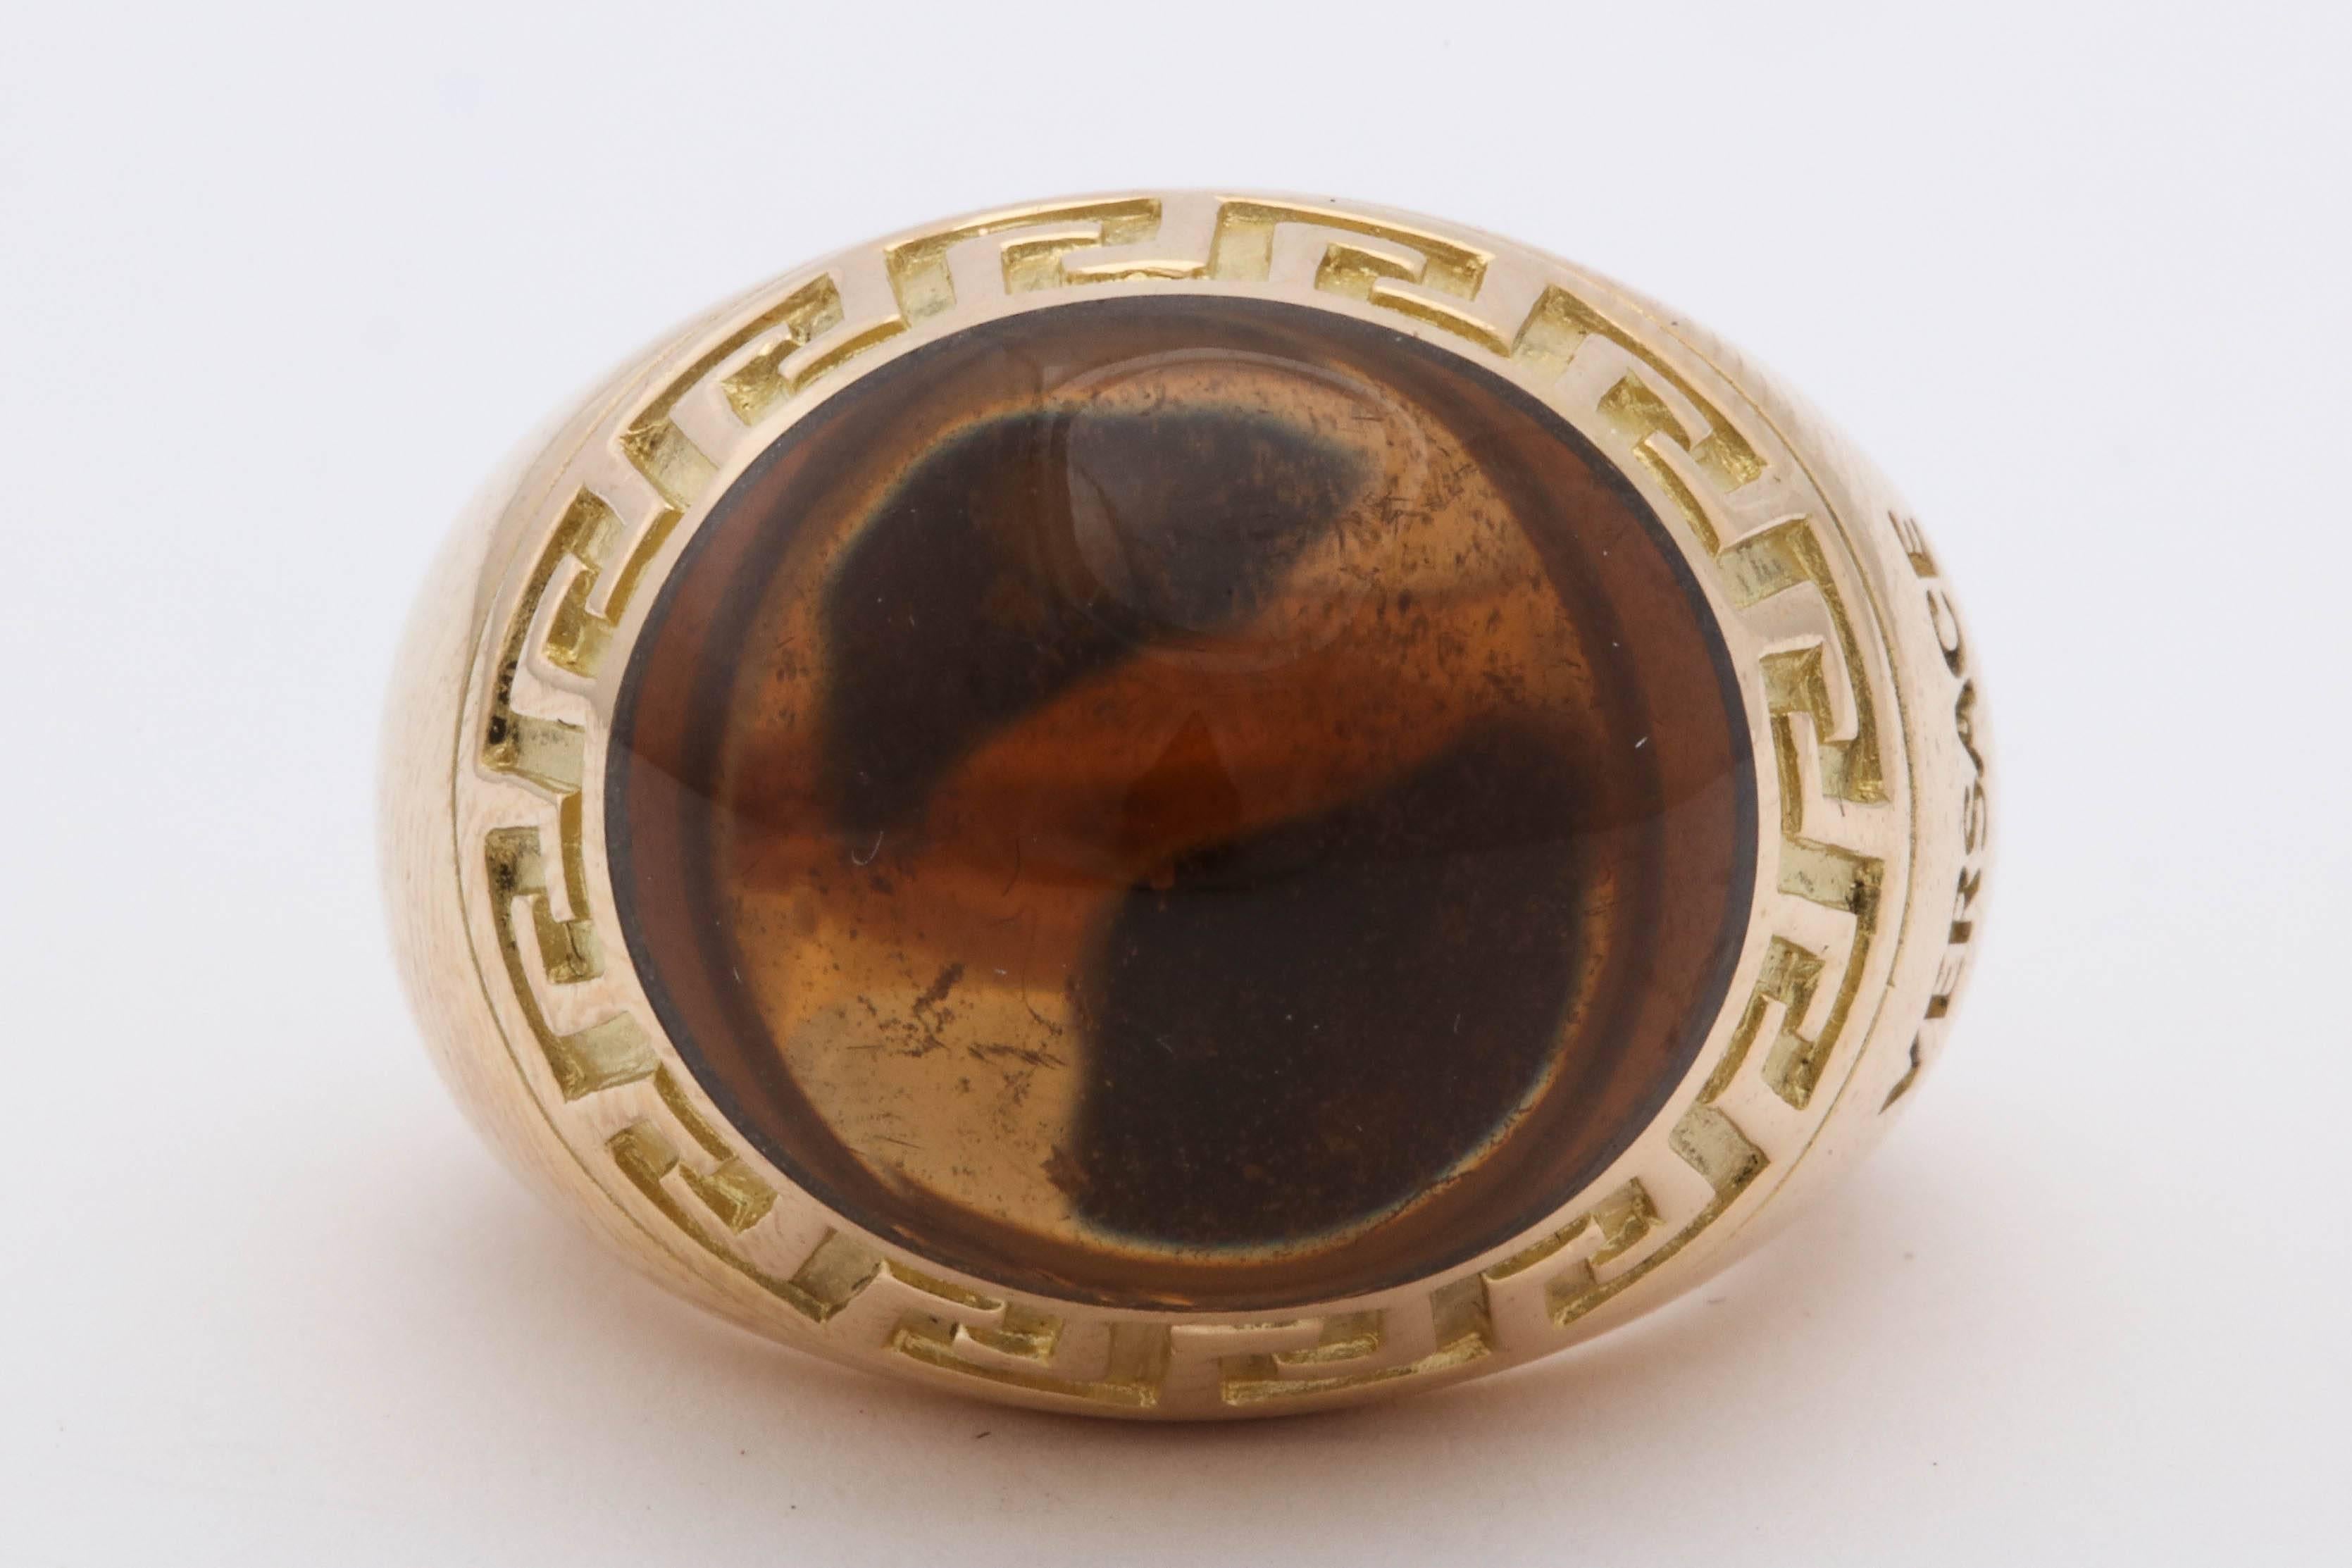 One Unisex Ring Heavy 18kt Yellow Gold Ring Designed With a Signature Greek Key engraving Around The Large Cabochon Sugarloaf cut Honey Color Citrine,Citrine Weighing Approximately 20 Carats. +Signed Versace Made In Italy In The 1990's. Current Ring